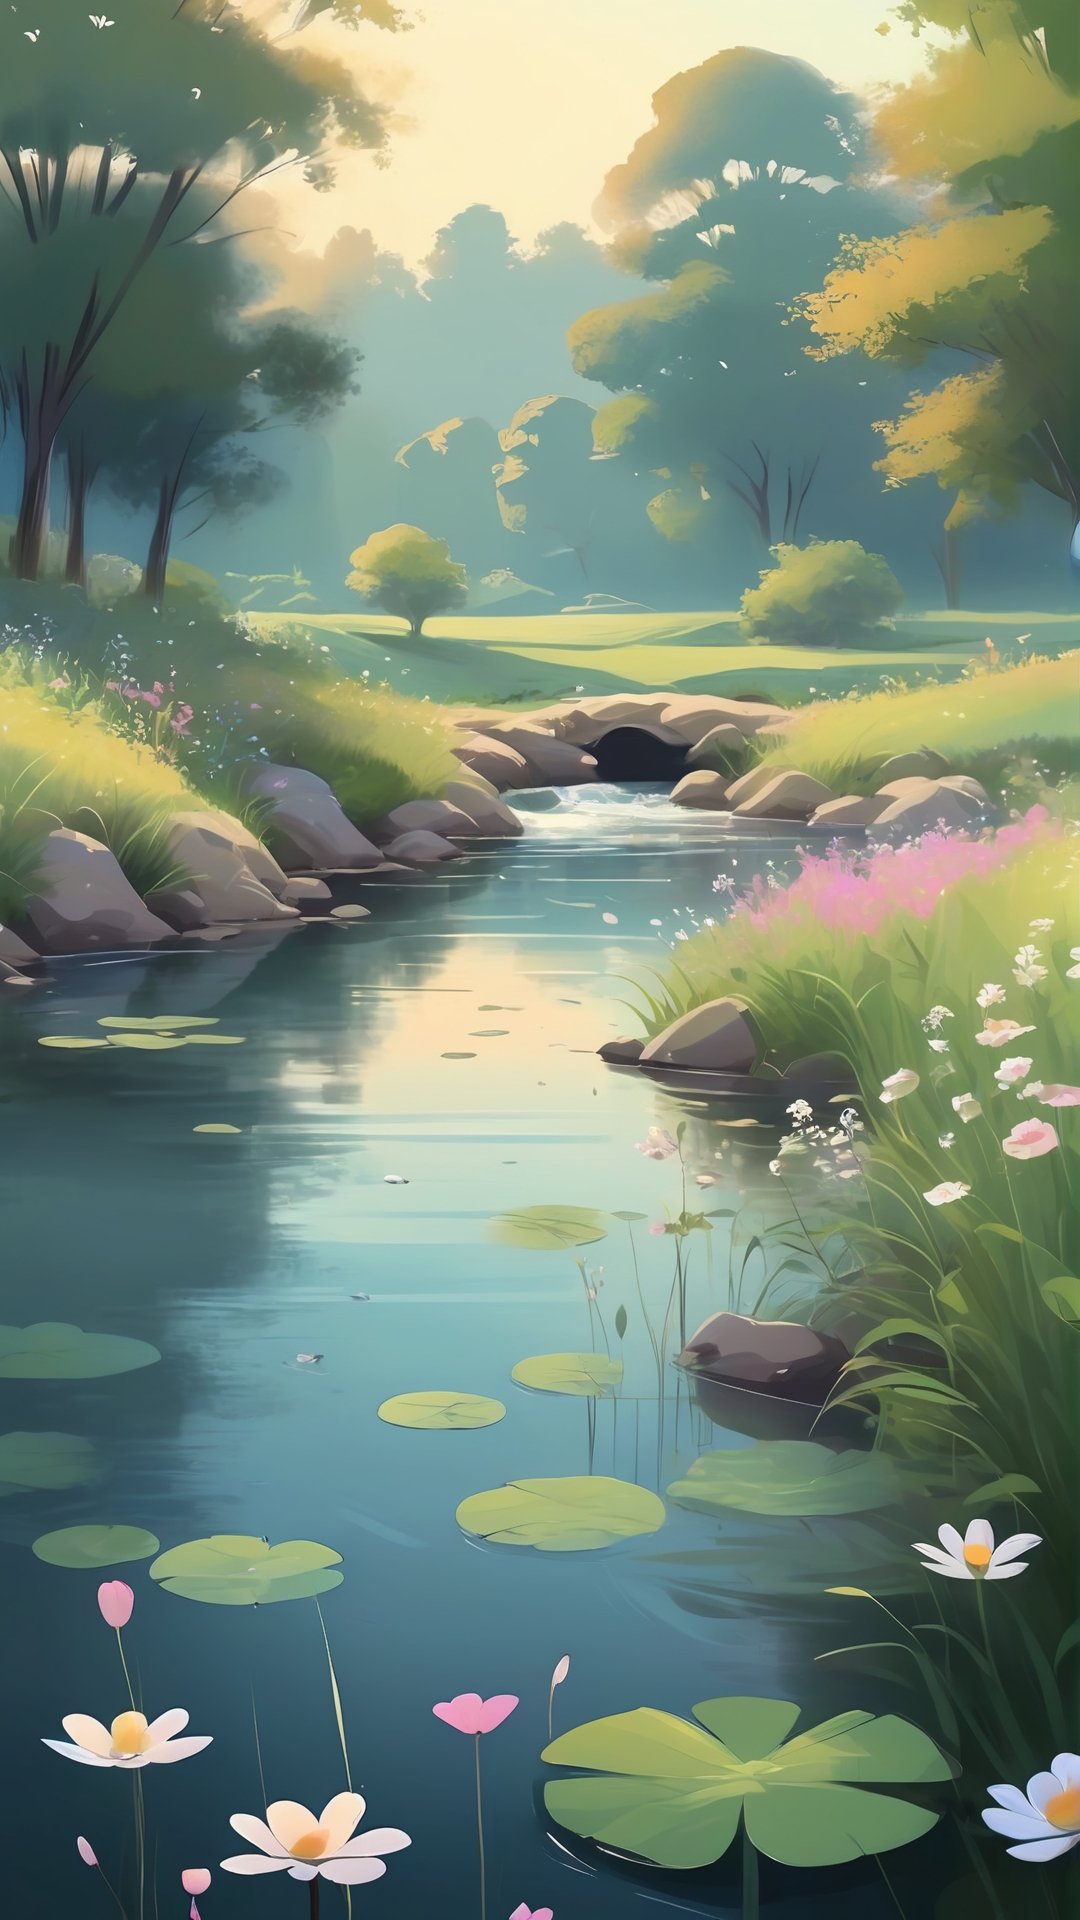 Create a captivating LOFI digital art illustration centered around relaxation, soothing vibes, and rural nature. Imagine a tranquil scene in the countryside, where time seems to slow down. Picture a peaceful meadow with gentle breezes rustling through the grass and wildflowers, creating a sense of calmness and serenity.

Incorporate elements like a babbling brook or a small pond, their tranquil waters reflecting the beauty of the surrounding nature. Add details like trees casting dappled shadows, birds chirping softly, and butterflies fluttering lazily among the flowers.

Use a soft, muted color palette to enhance the soothing atmosphere, with subtle textures and gradients that mimic the feel of an analog painting. Incorporate gentle light and shadow to create depth and dimension, inviting viewers to immerse themselves in the peacefulness of rural life.

Let the overall composition convey a sense of tranquility, relaxation, and the inherent beauty of nature, providing a calming escape for the viewer and evoking feelings of serenity and contentment.